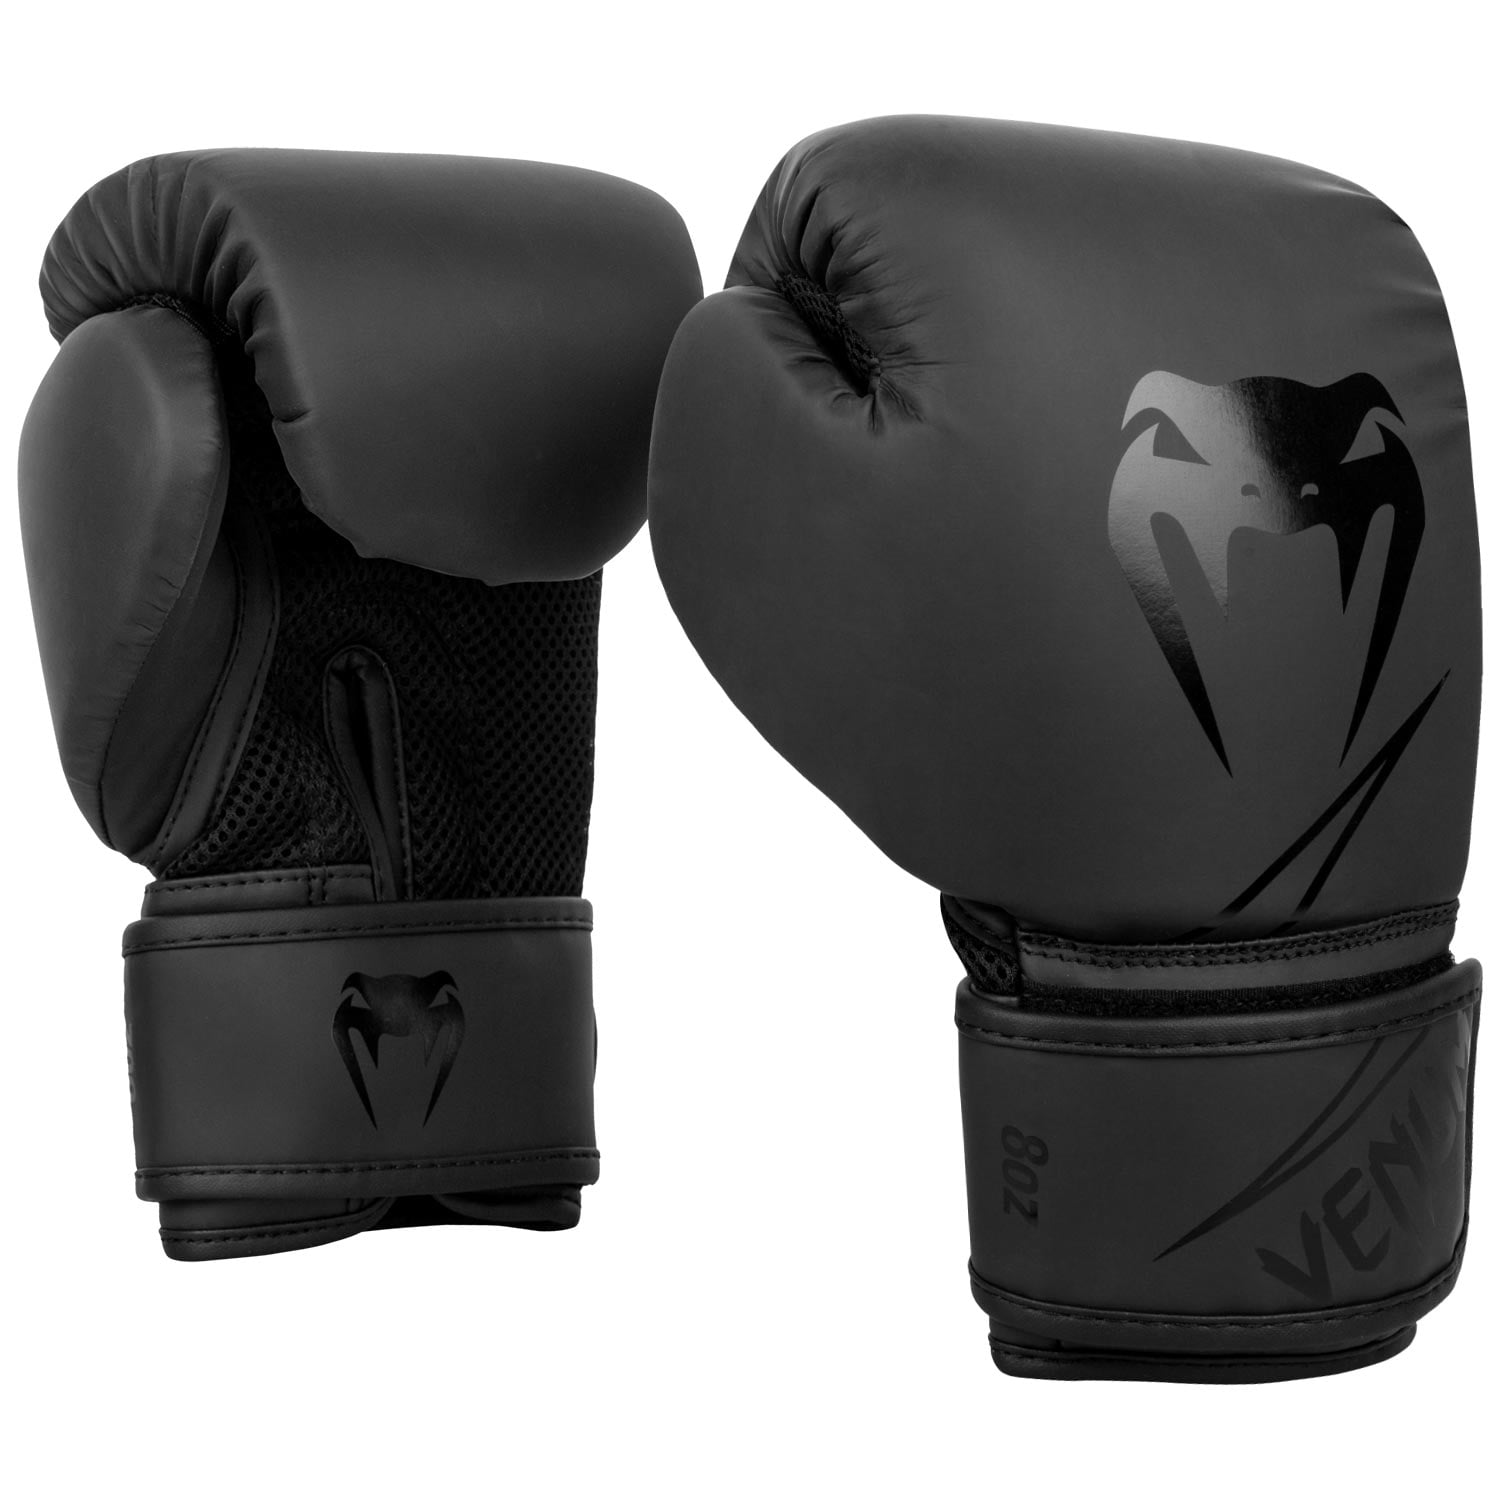 Reebok Unisex Boxing Mitts Gloves Oval 